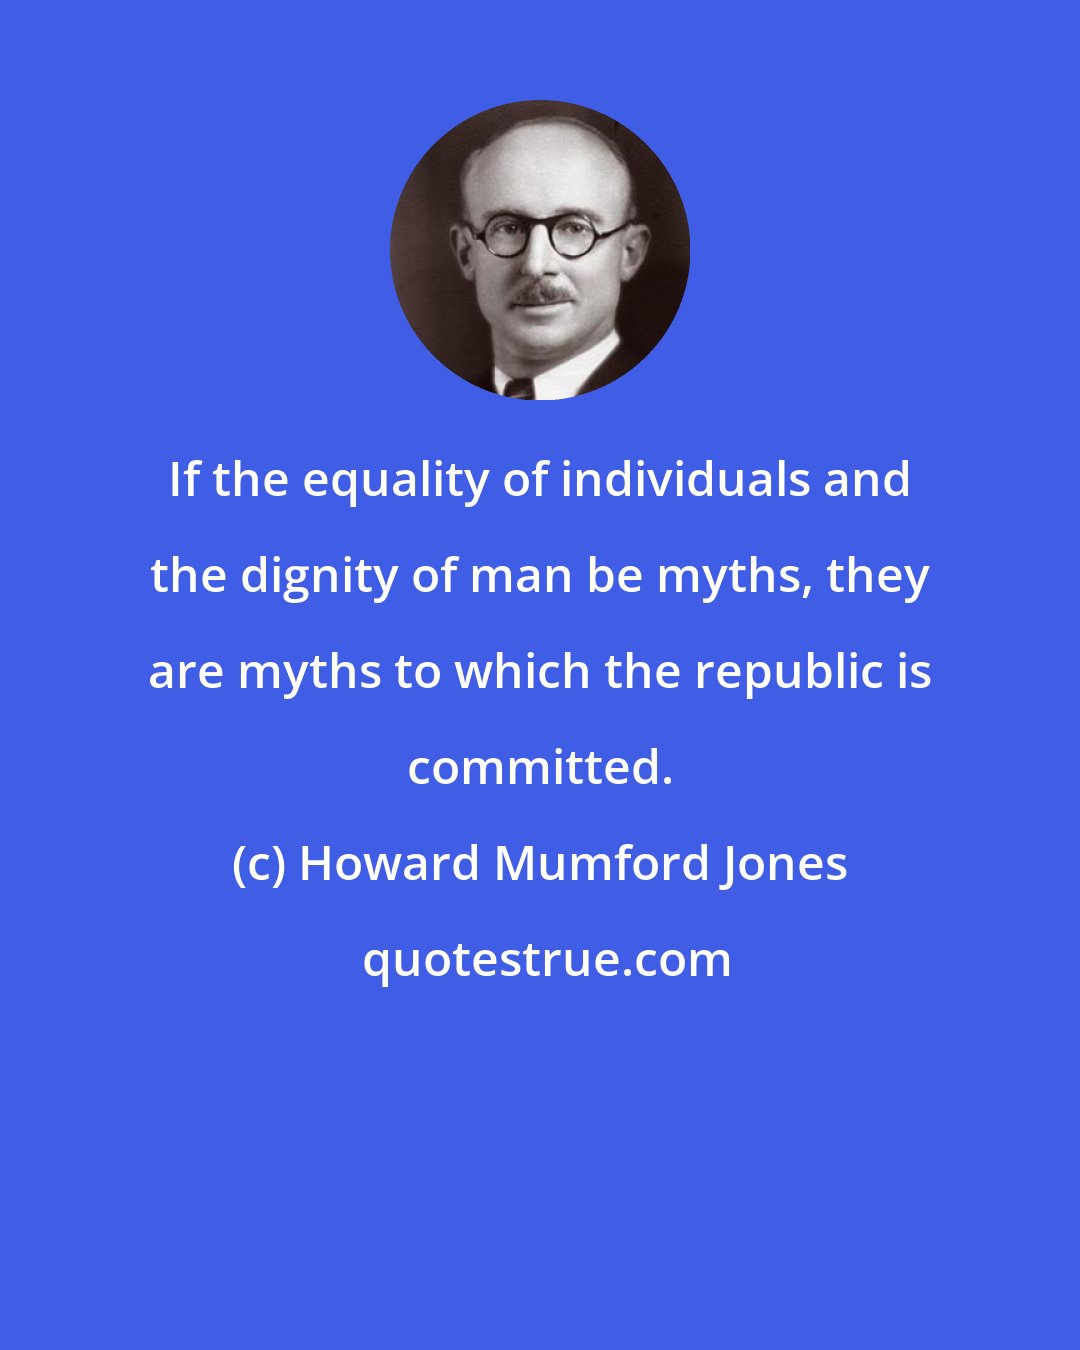 Howard Mumford Jones: If the equality of individuals and the dignity of man be myths, they are myths to which the republic is committed.